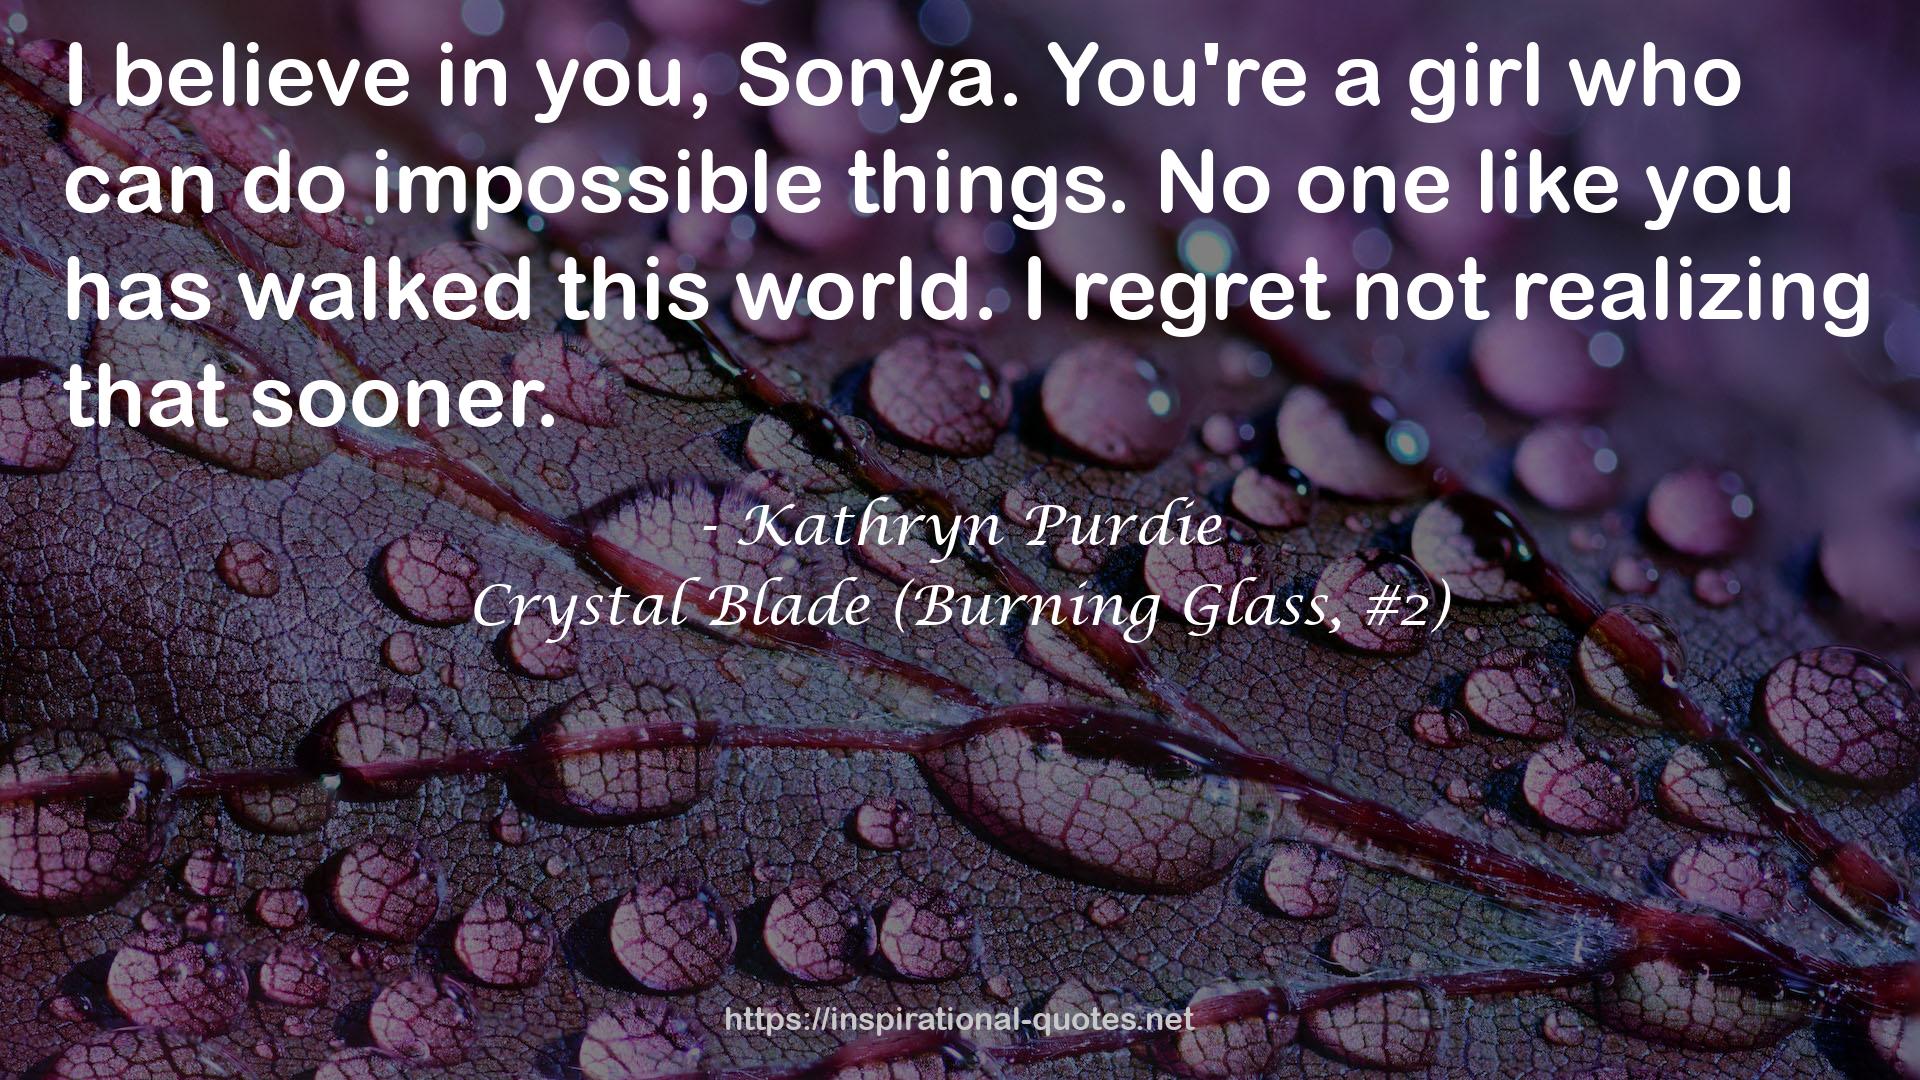 Crystal Blade (Burning Glass, #2) QUOTES